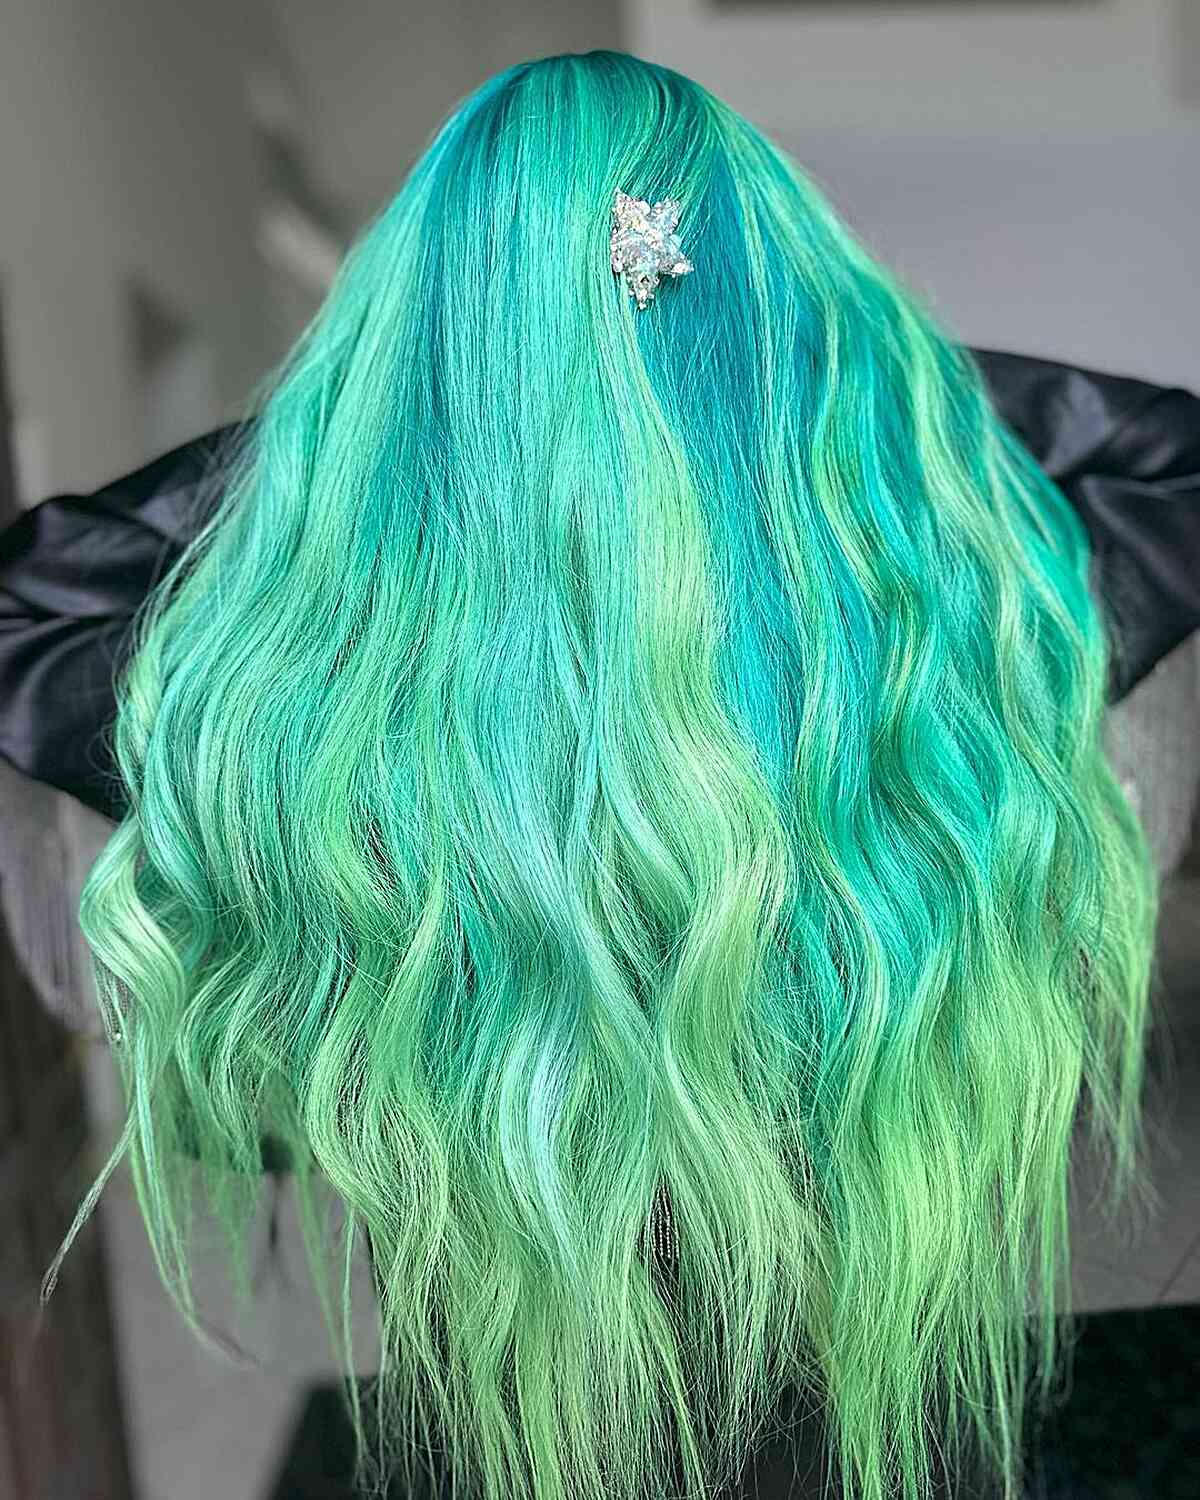 What's the Right Age for Crazy Hair Colors?